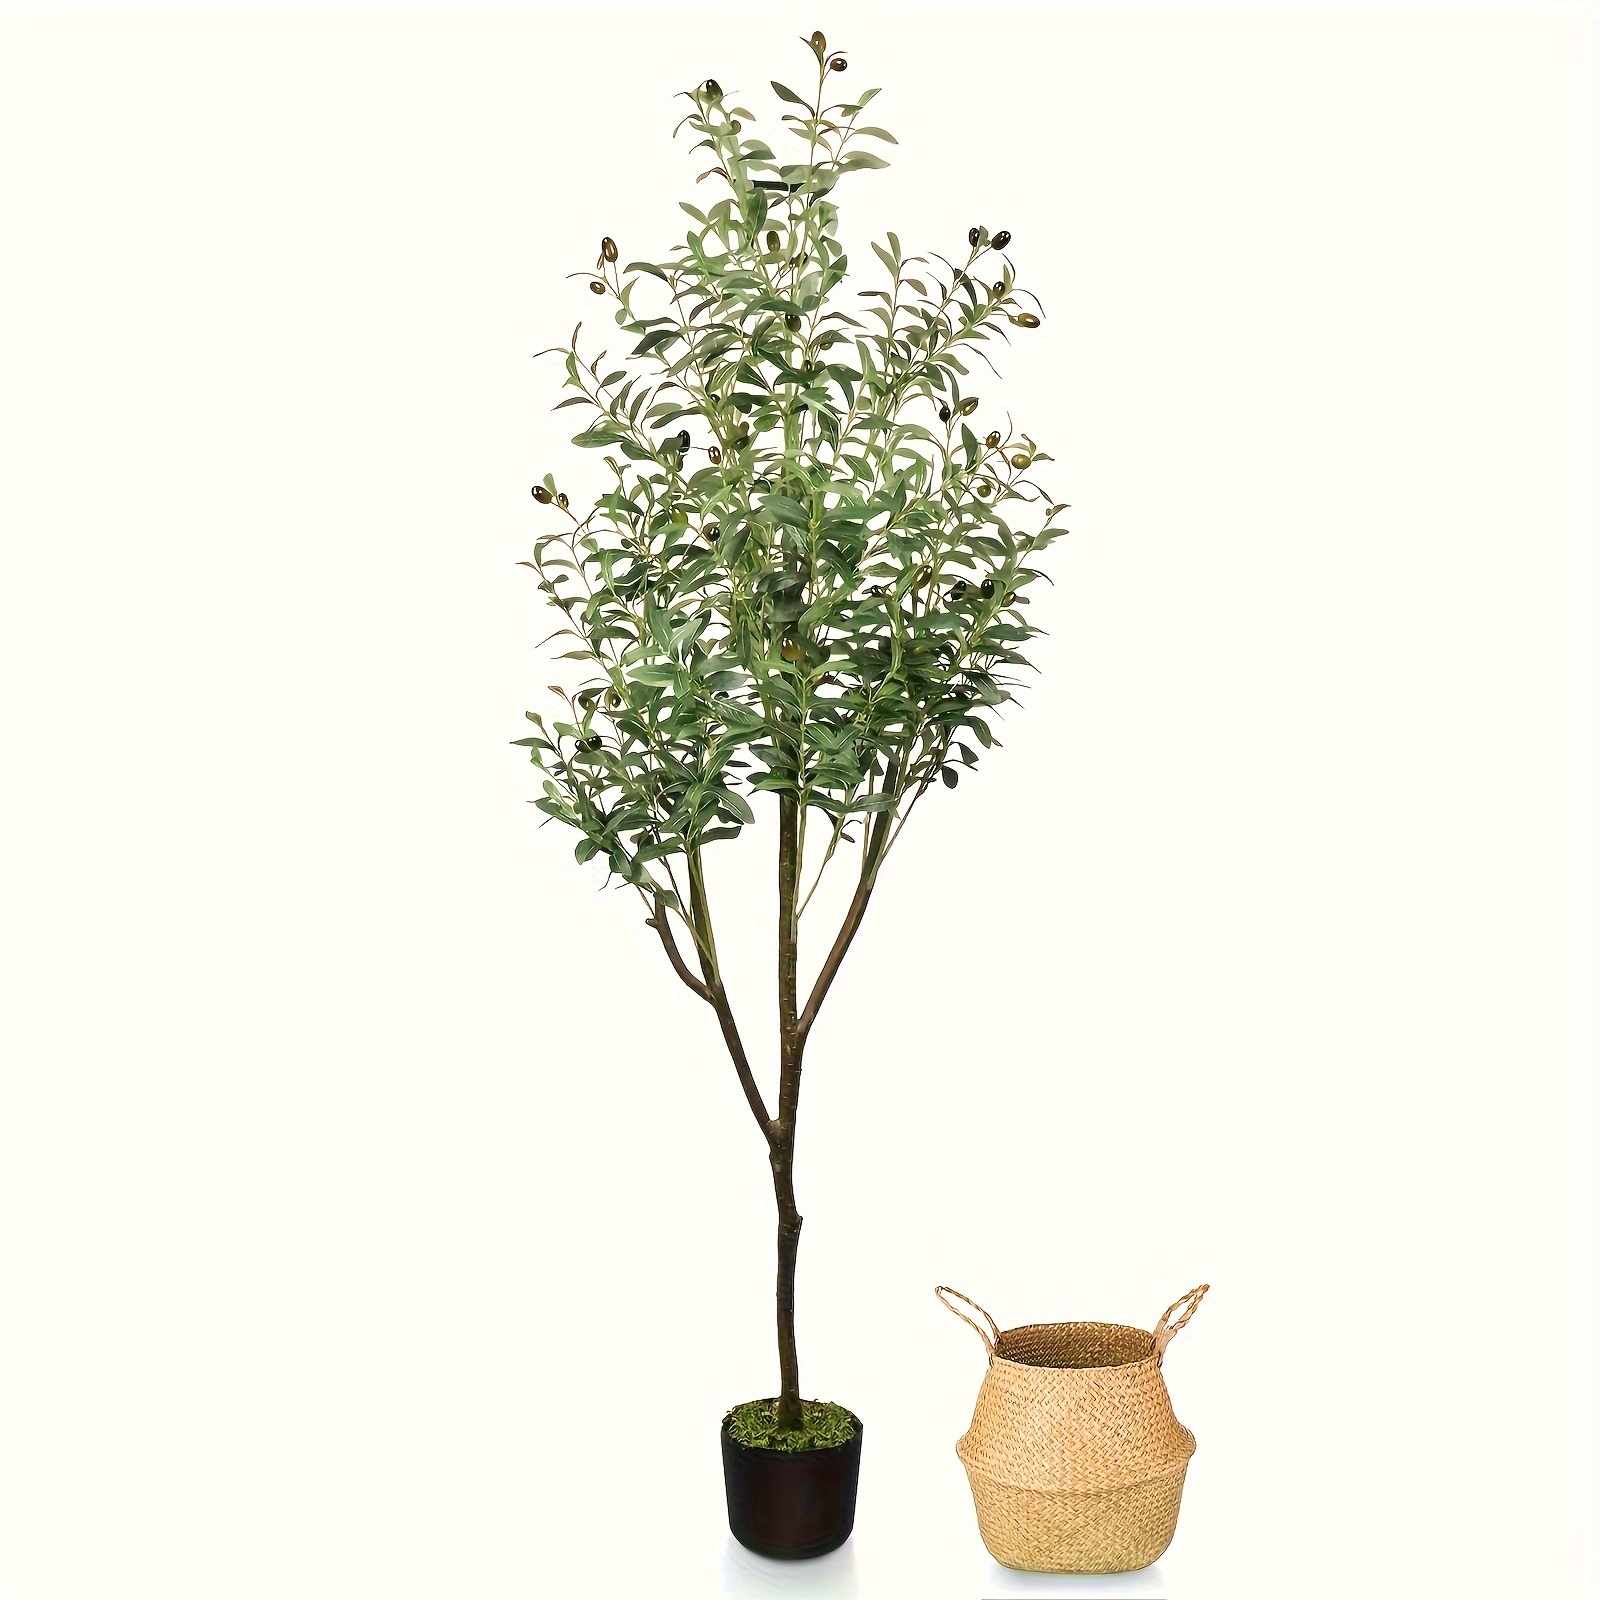 

71 Inch Artificial Olive Tree Realistic Fake Green Plant Home Decor Leaf Design For Living Room Office Corridor Low Maintenance Indoor Outdoor Decoration